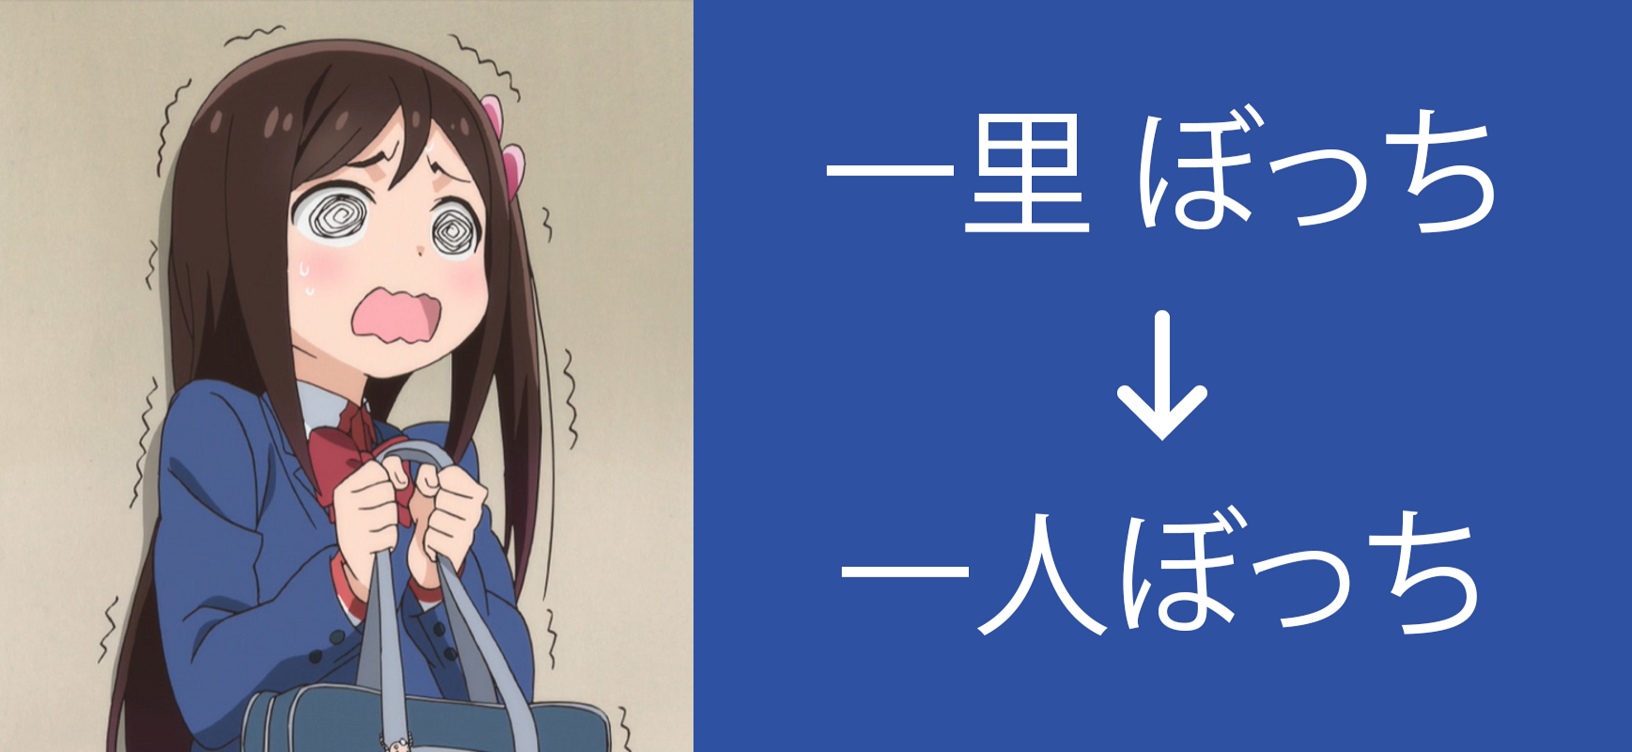 What Is the Meaning of Hitori Bocchi & How Is It Related to Anime?